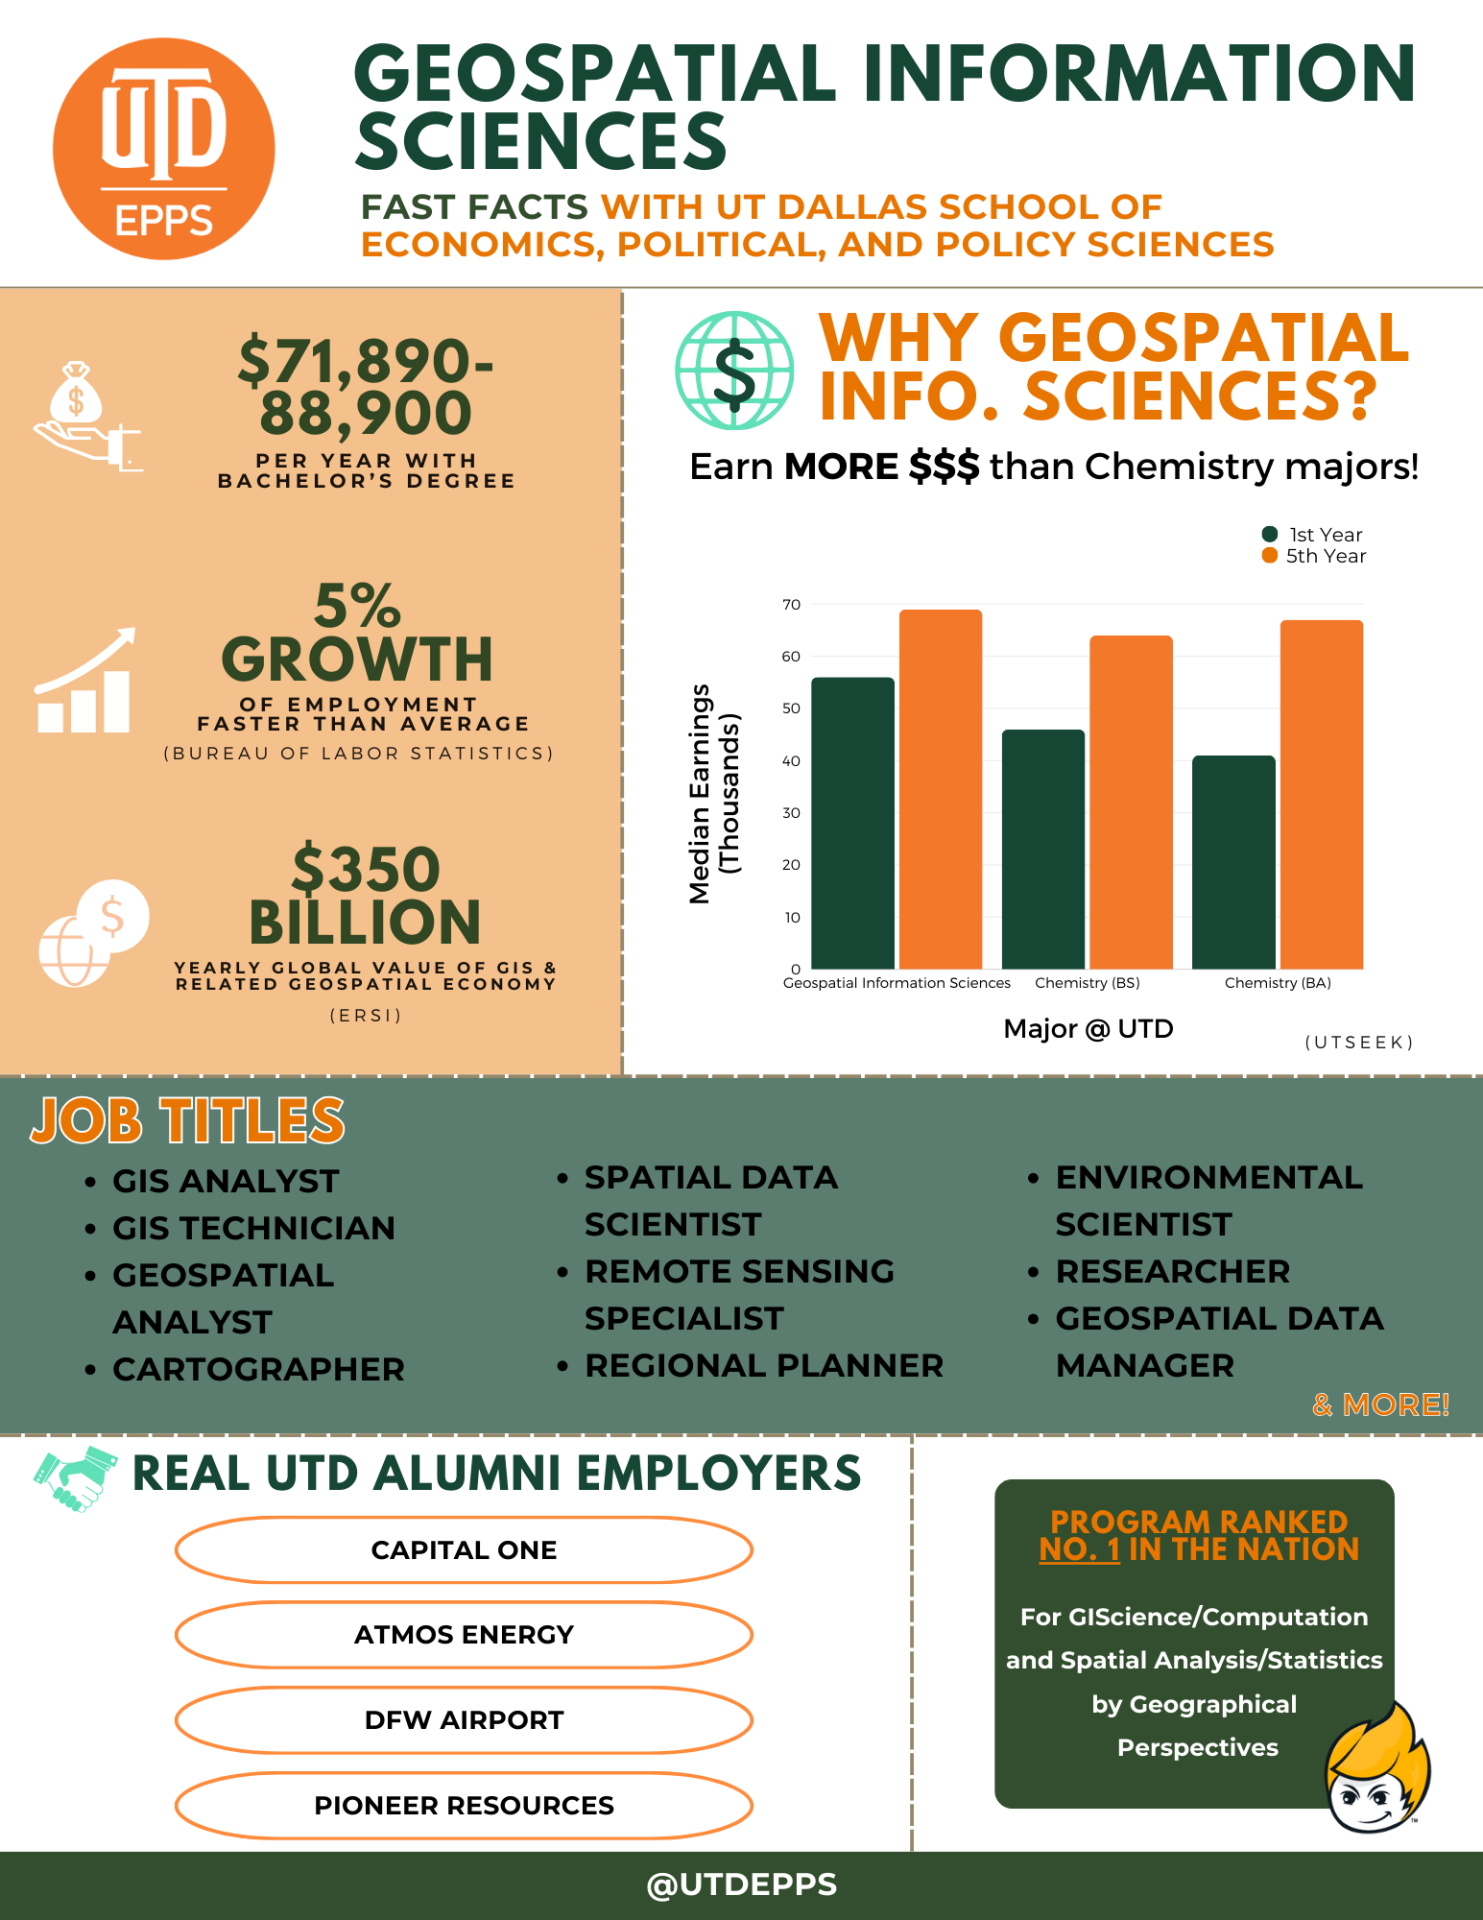 Geospatial information sciences. Fast Facts with Ut Dallas school of economics, political, and policy sciences. 

,890-88,900 is the average salary per year with a bachelor’s degree.
There is a 5% Growth of employment which is faster than average. Data is from Bureau of Labor Statistics. 0 billion yearly global value of gis & related geospatial economy. Data is from ERSI. 

WHY GEOSPATIAL INFO. SCIENCES?
Earn MORE money than Chemistry majors! The graph shows that UTD GIS majors earn more than their Chemistry major counterparts in their first and fifth year. Data is from UTSEEK. 


Real UTD alumni employers include:
CAPITAL ONE
ATMOS ENERGY
DFW AIRPORT
PIONEER RESOURCES

Job titles include: 
GIS ANALYST
GIS TECHNICIAN
GEOSPATIAL ANALYST
CARTOGRAPHER
SPATIAL DATA SCIENTIST
REMOTE SENSING SPECIALIST
REGIONAL PLANNER
ENVIRONMENTAL SCIENTIST
RESEARCHER
GEOSPATIAL DATA MANAGER

Program ranked No. 1 in the nation
For GIScience/Computation and Spatial Analysis/Statistics by Geographical Perspectives.

@UTDEPPS